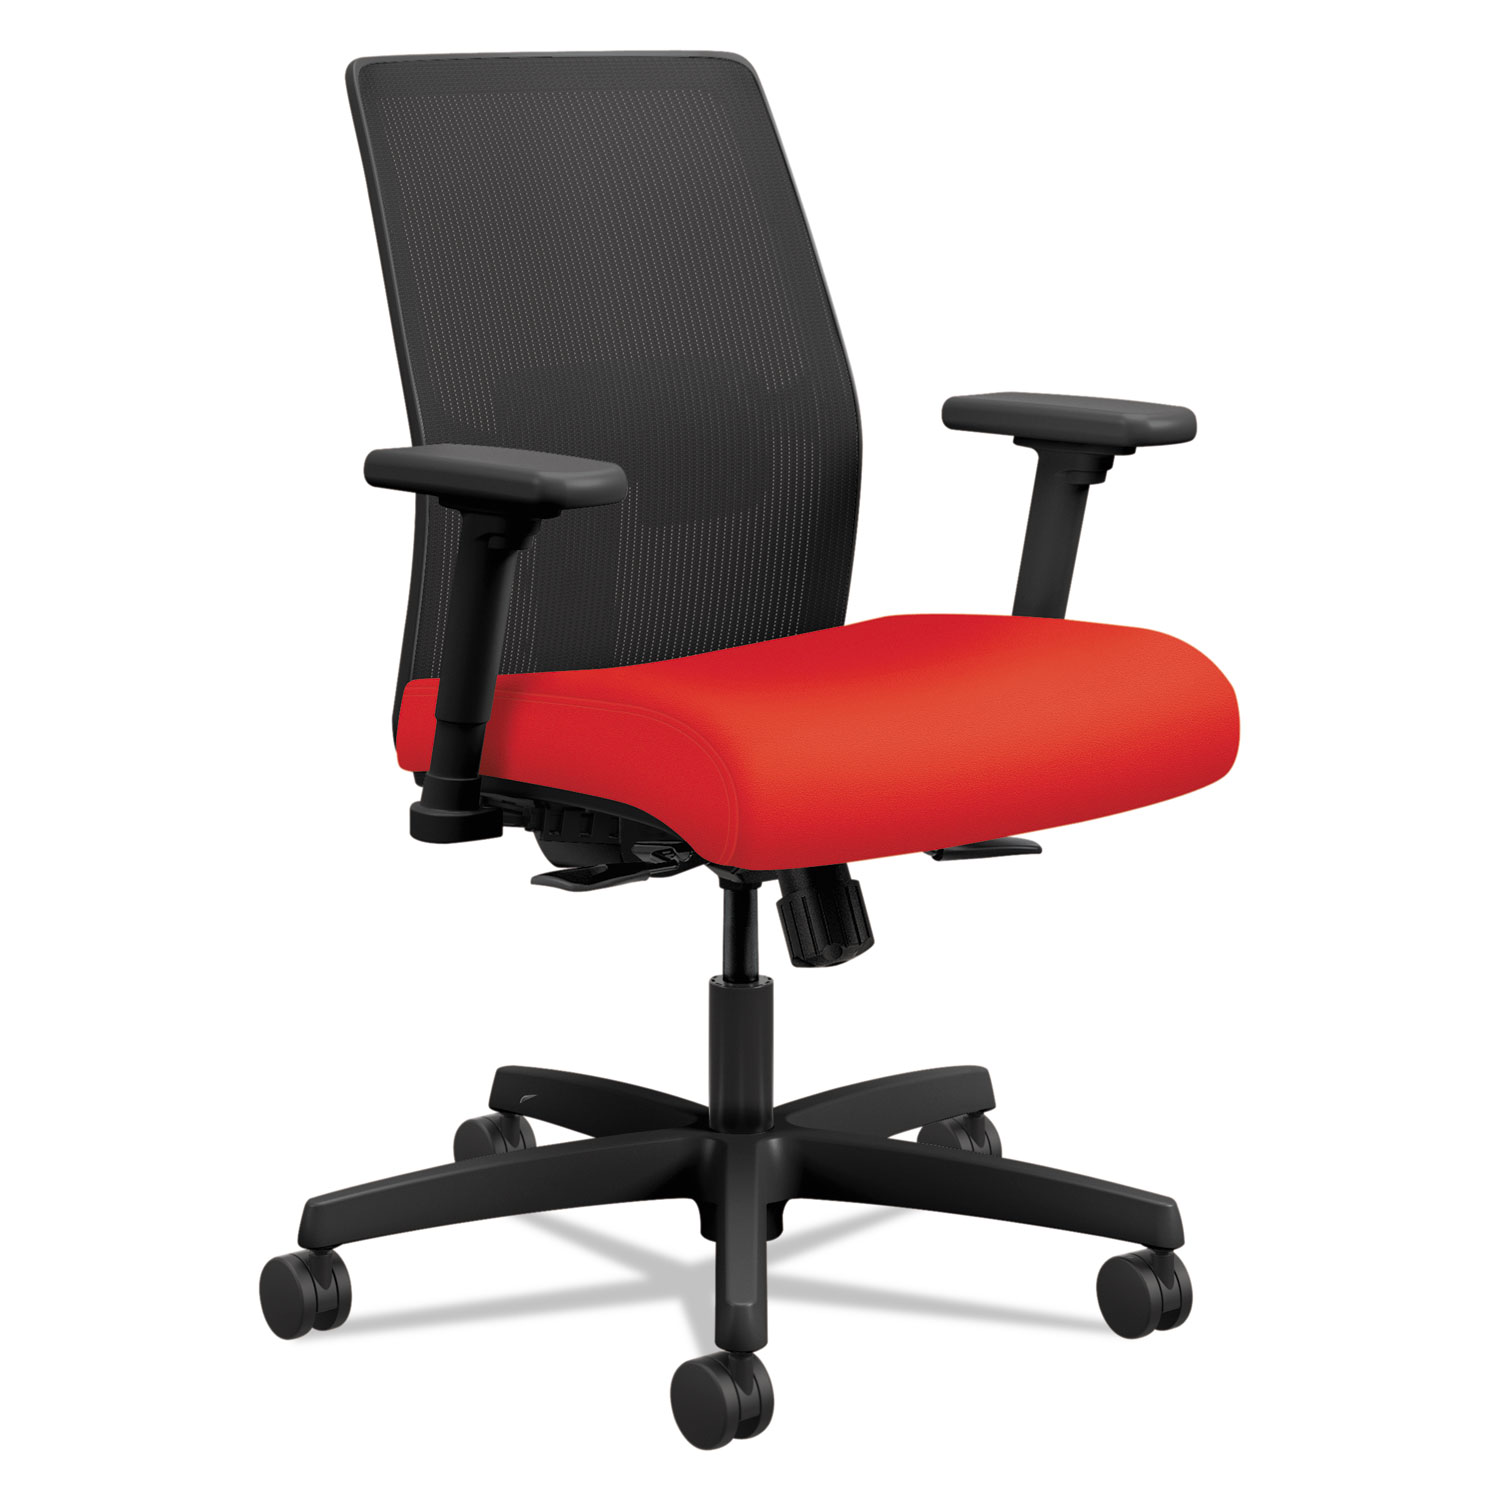  HON HONI2L1AMLC67TK Ignition 2.0 4-Way Stretch Low-Back Mesh Task Chair, Supports up to 300 lbs., Ruby Seat, Black Back/Base (HONI2L1AMLC67TK) 